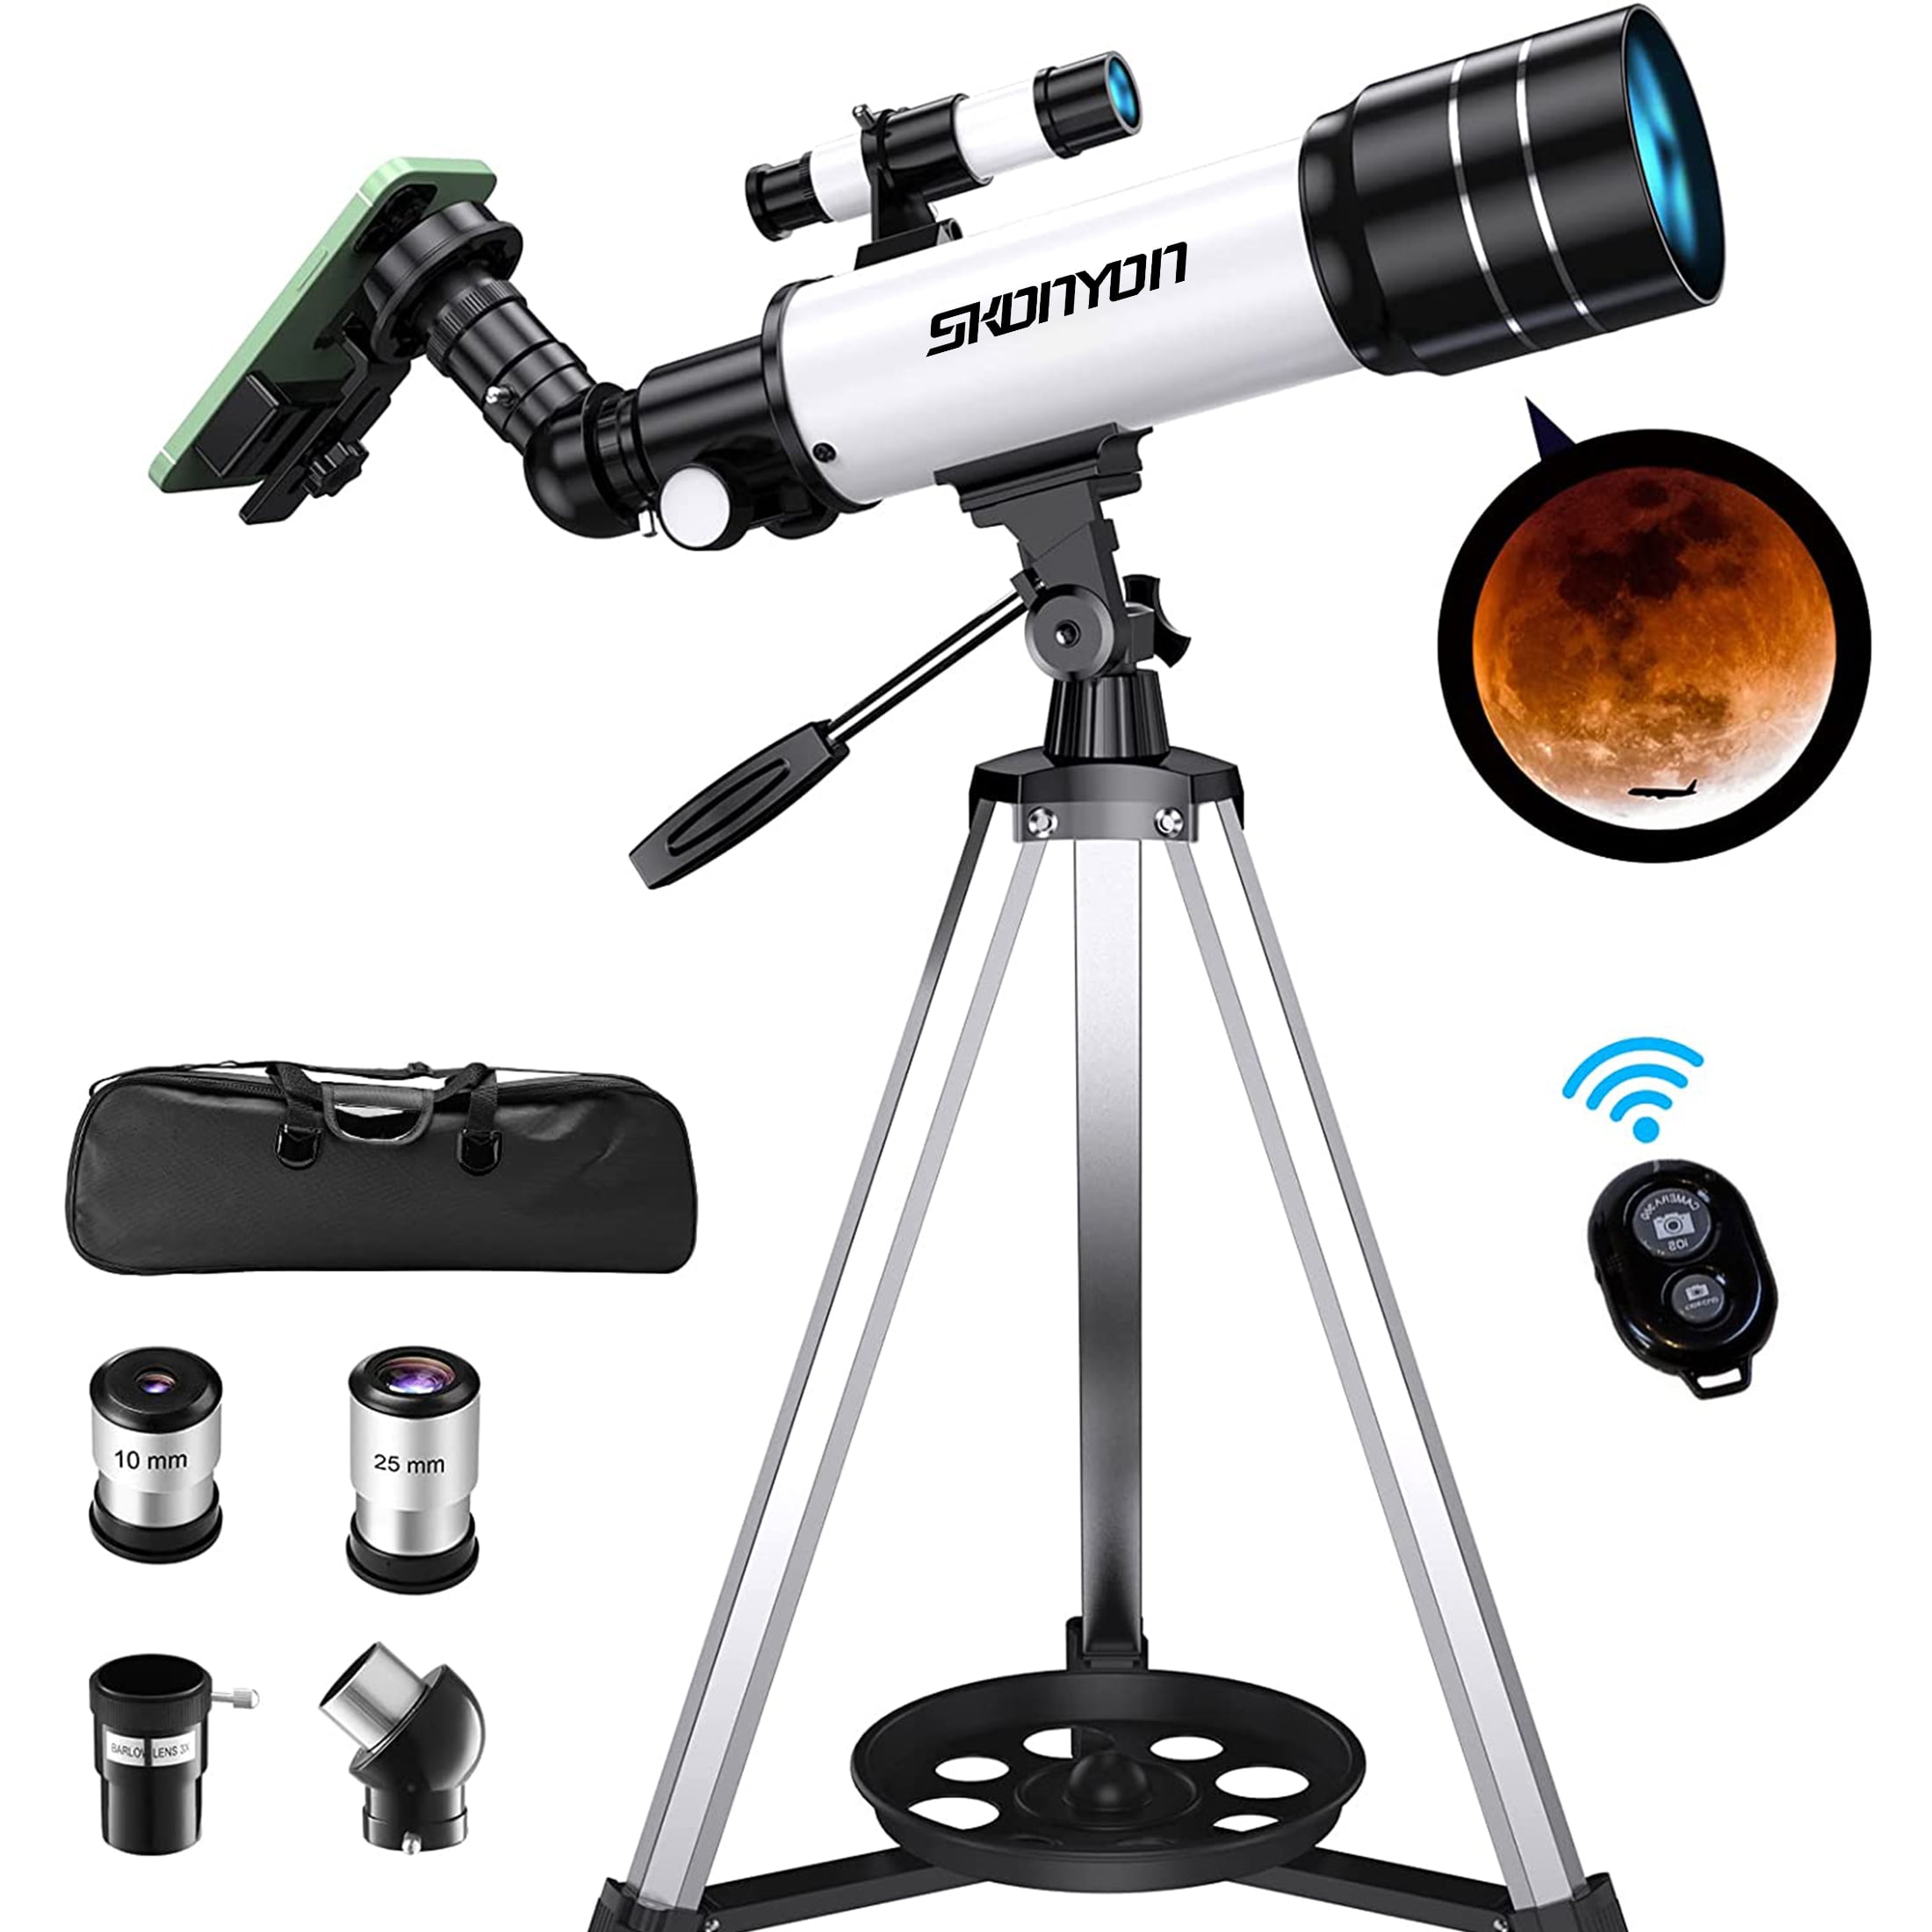 Telescopes for Adults HUWAI Telescope for Kids Beginners Astronomy Refractor Telescope Portable Travel Scope with Tripod 70Mm Aperture Fully Multi-Coated Optics 